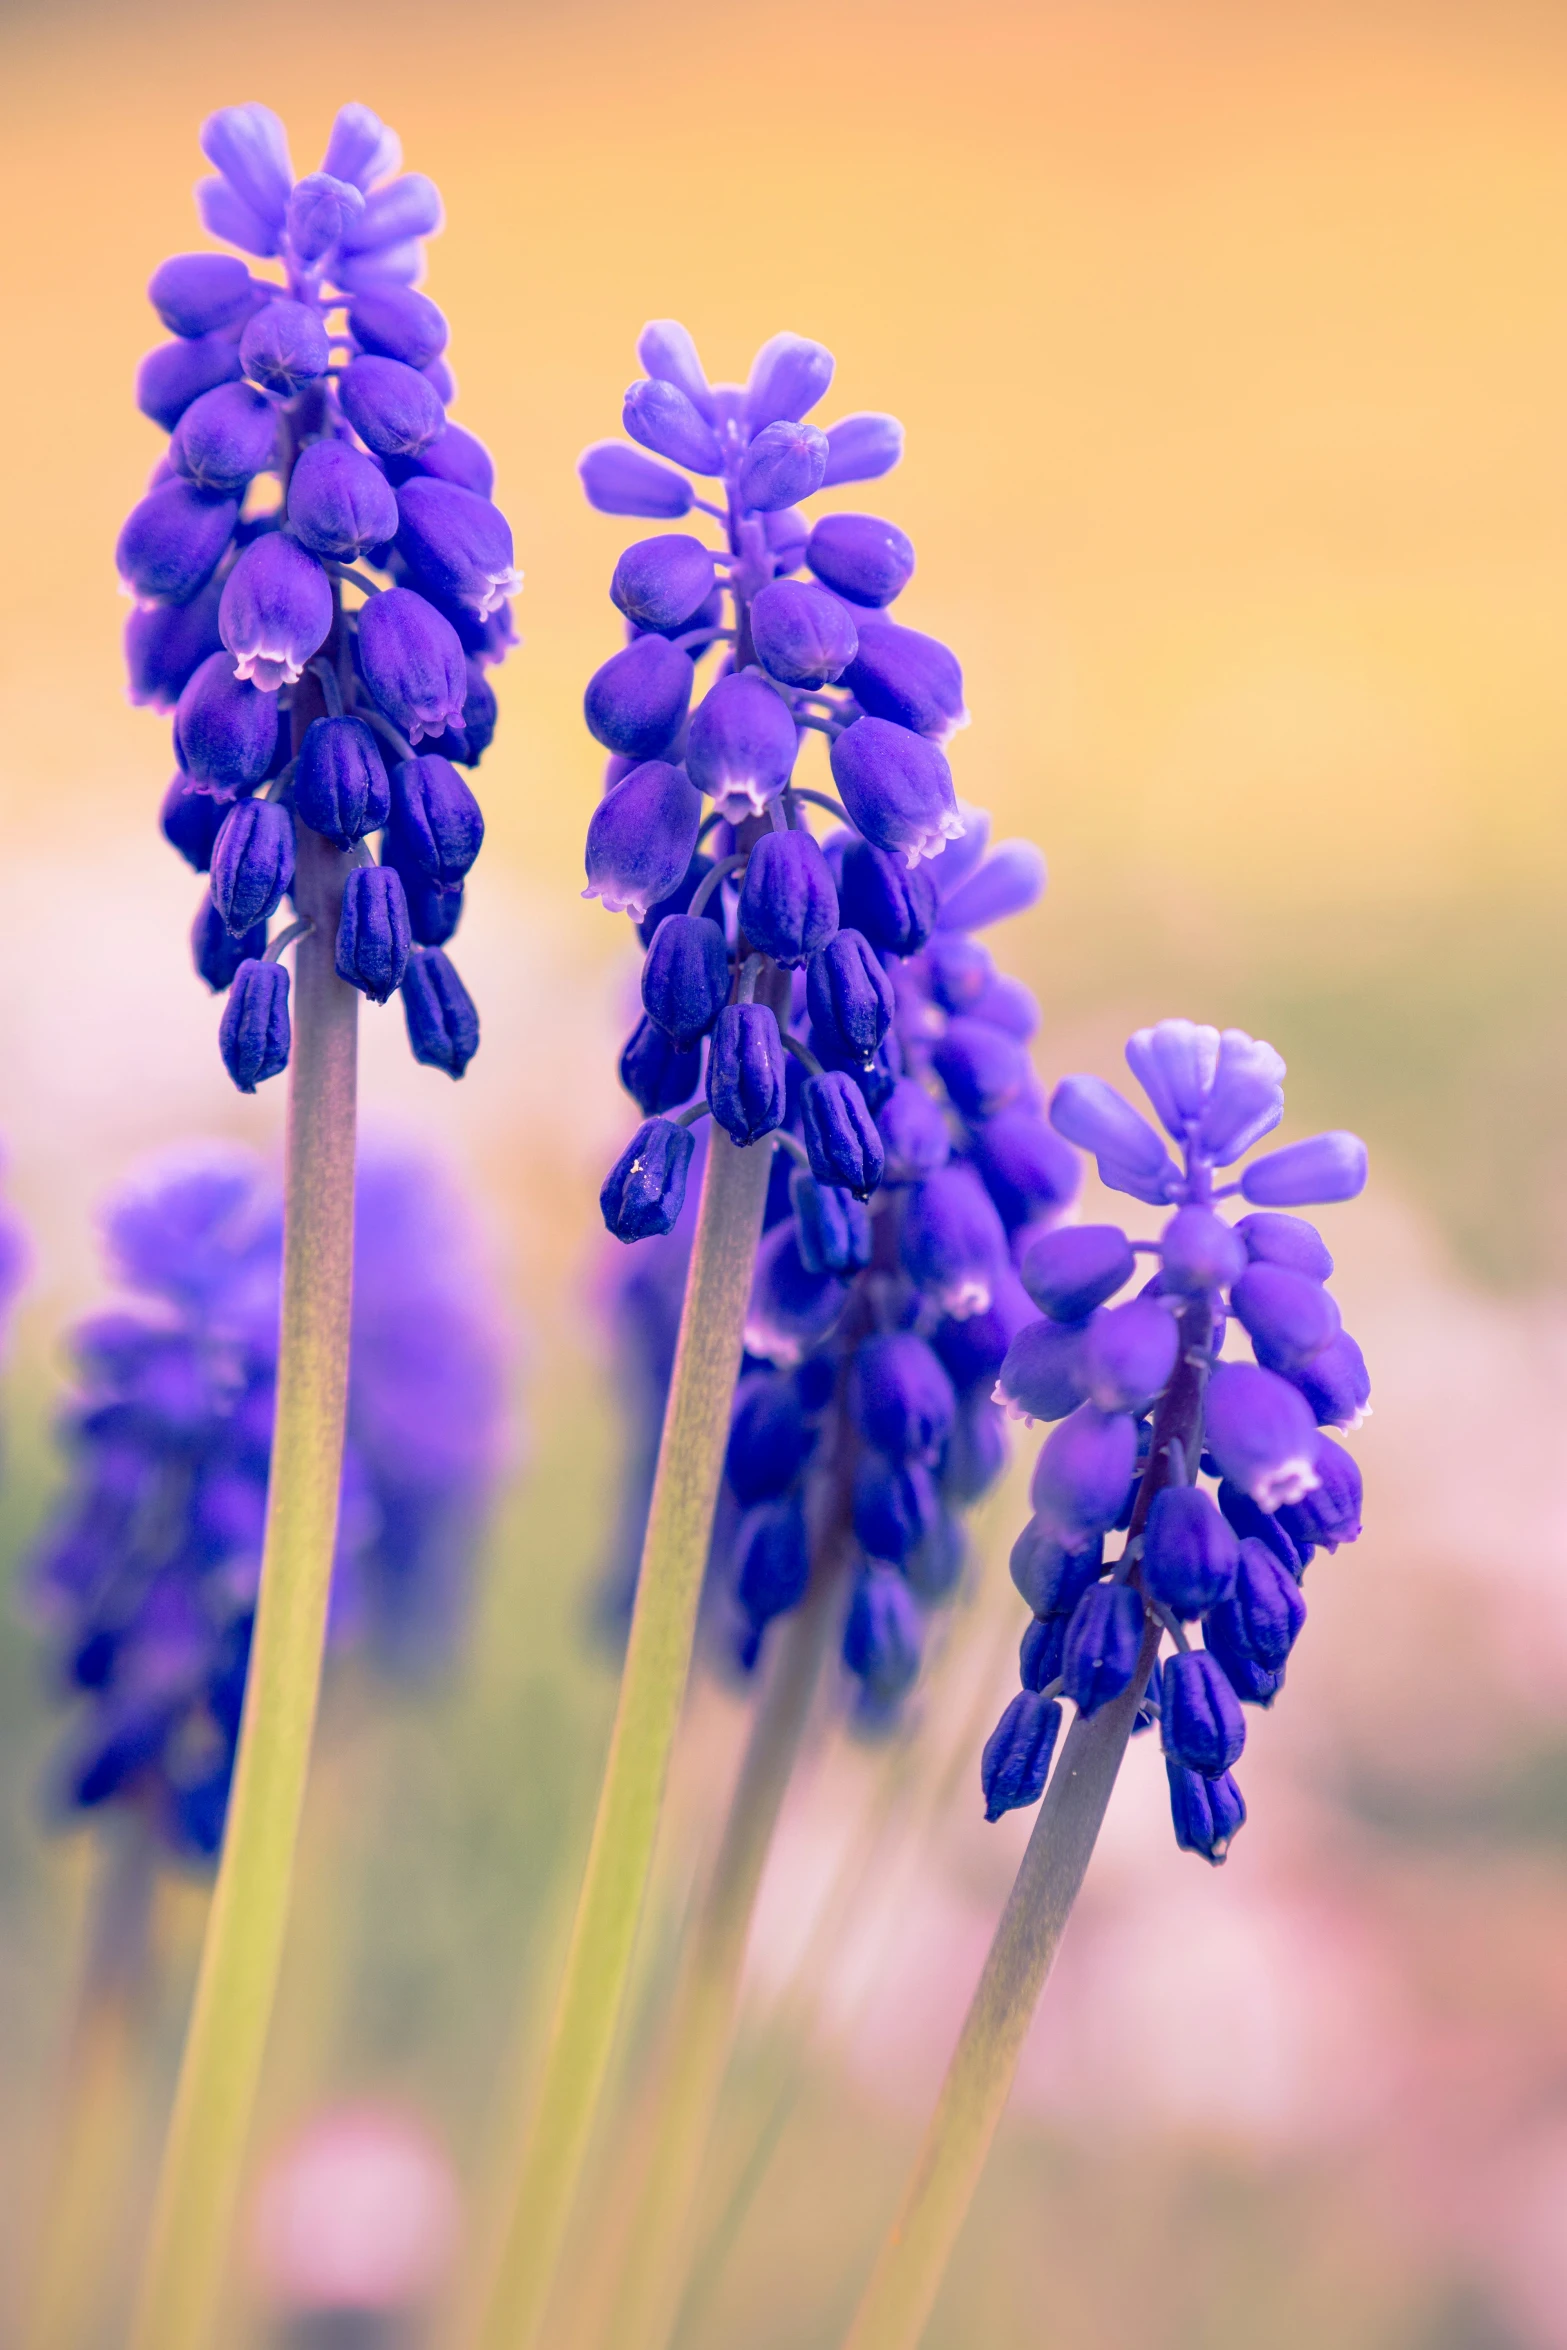 four purple flowers blooming out of stems with the blurred background